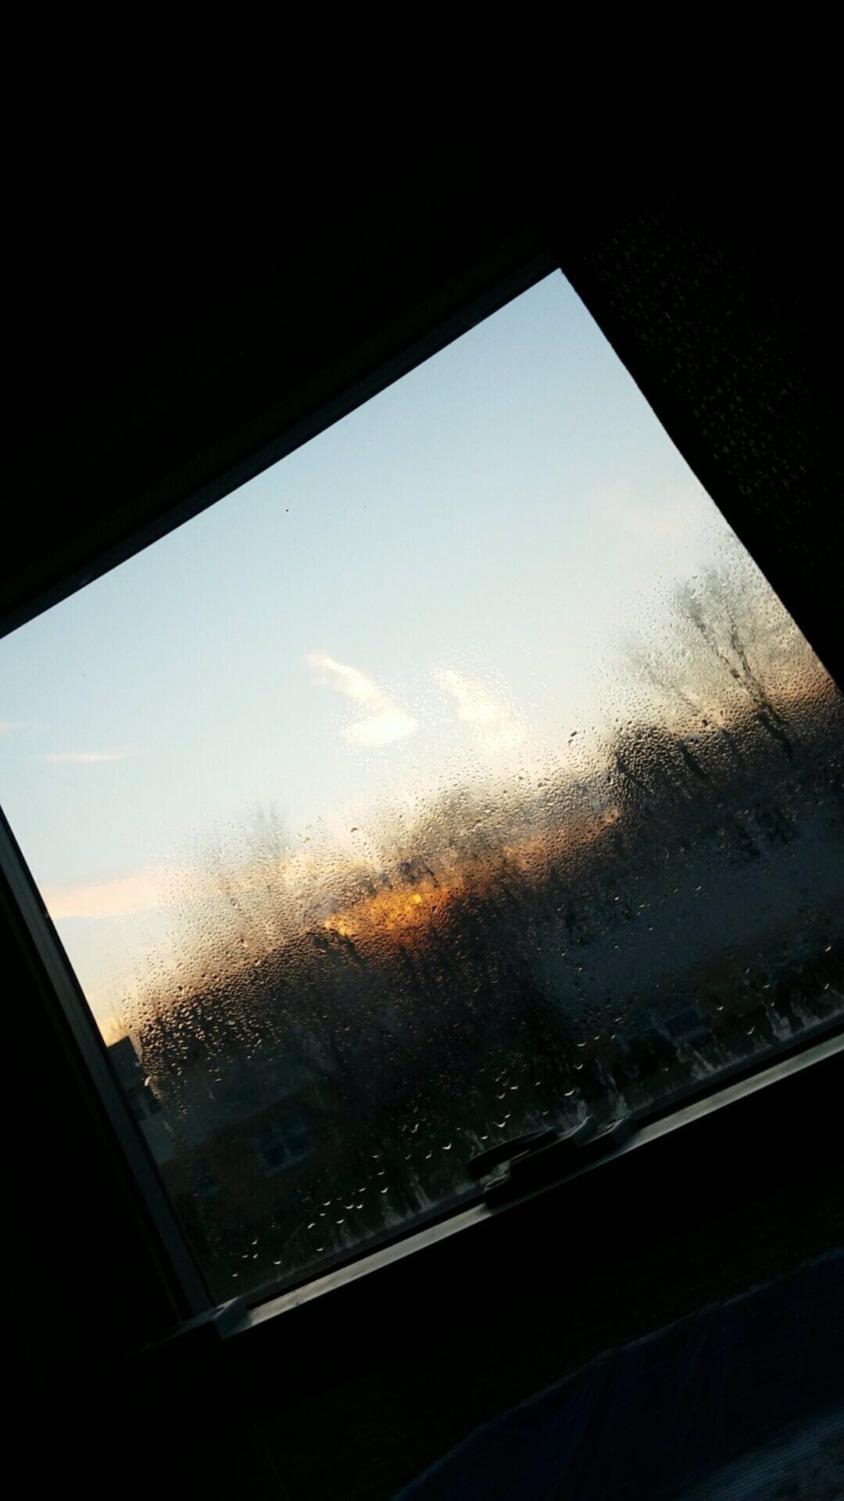 The school bus window in the morning.